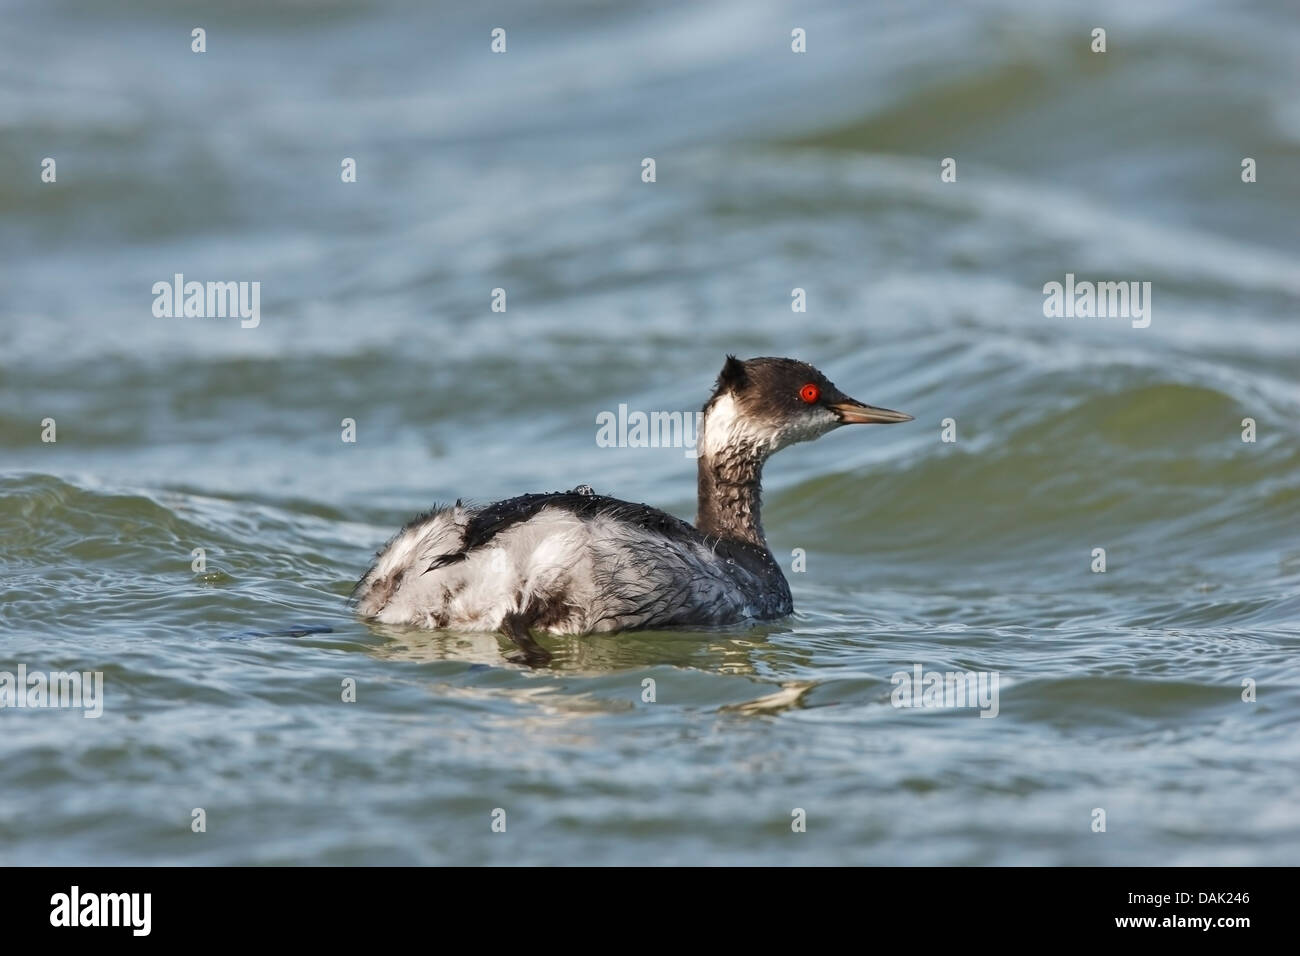 black-necked grebe (Podiceps nigricollis) adult in winter plumage swimming on water, Spain, Europe Stock Photo